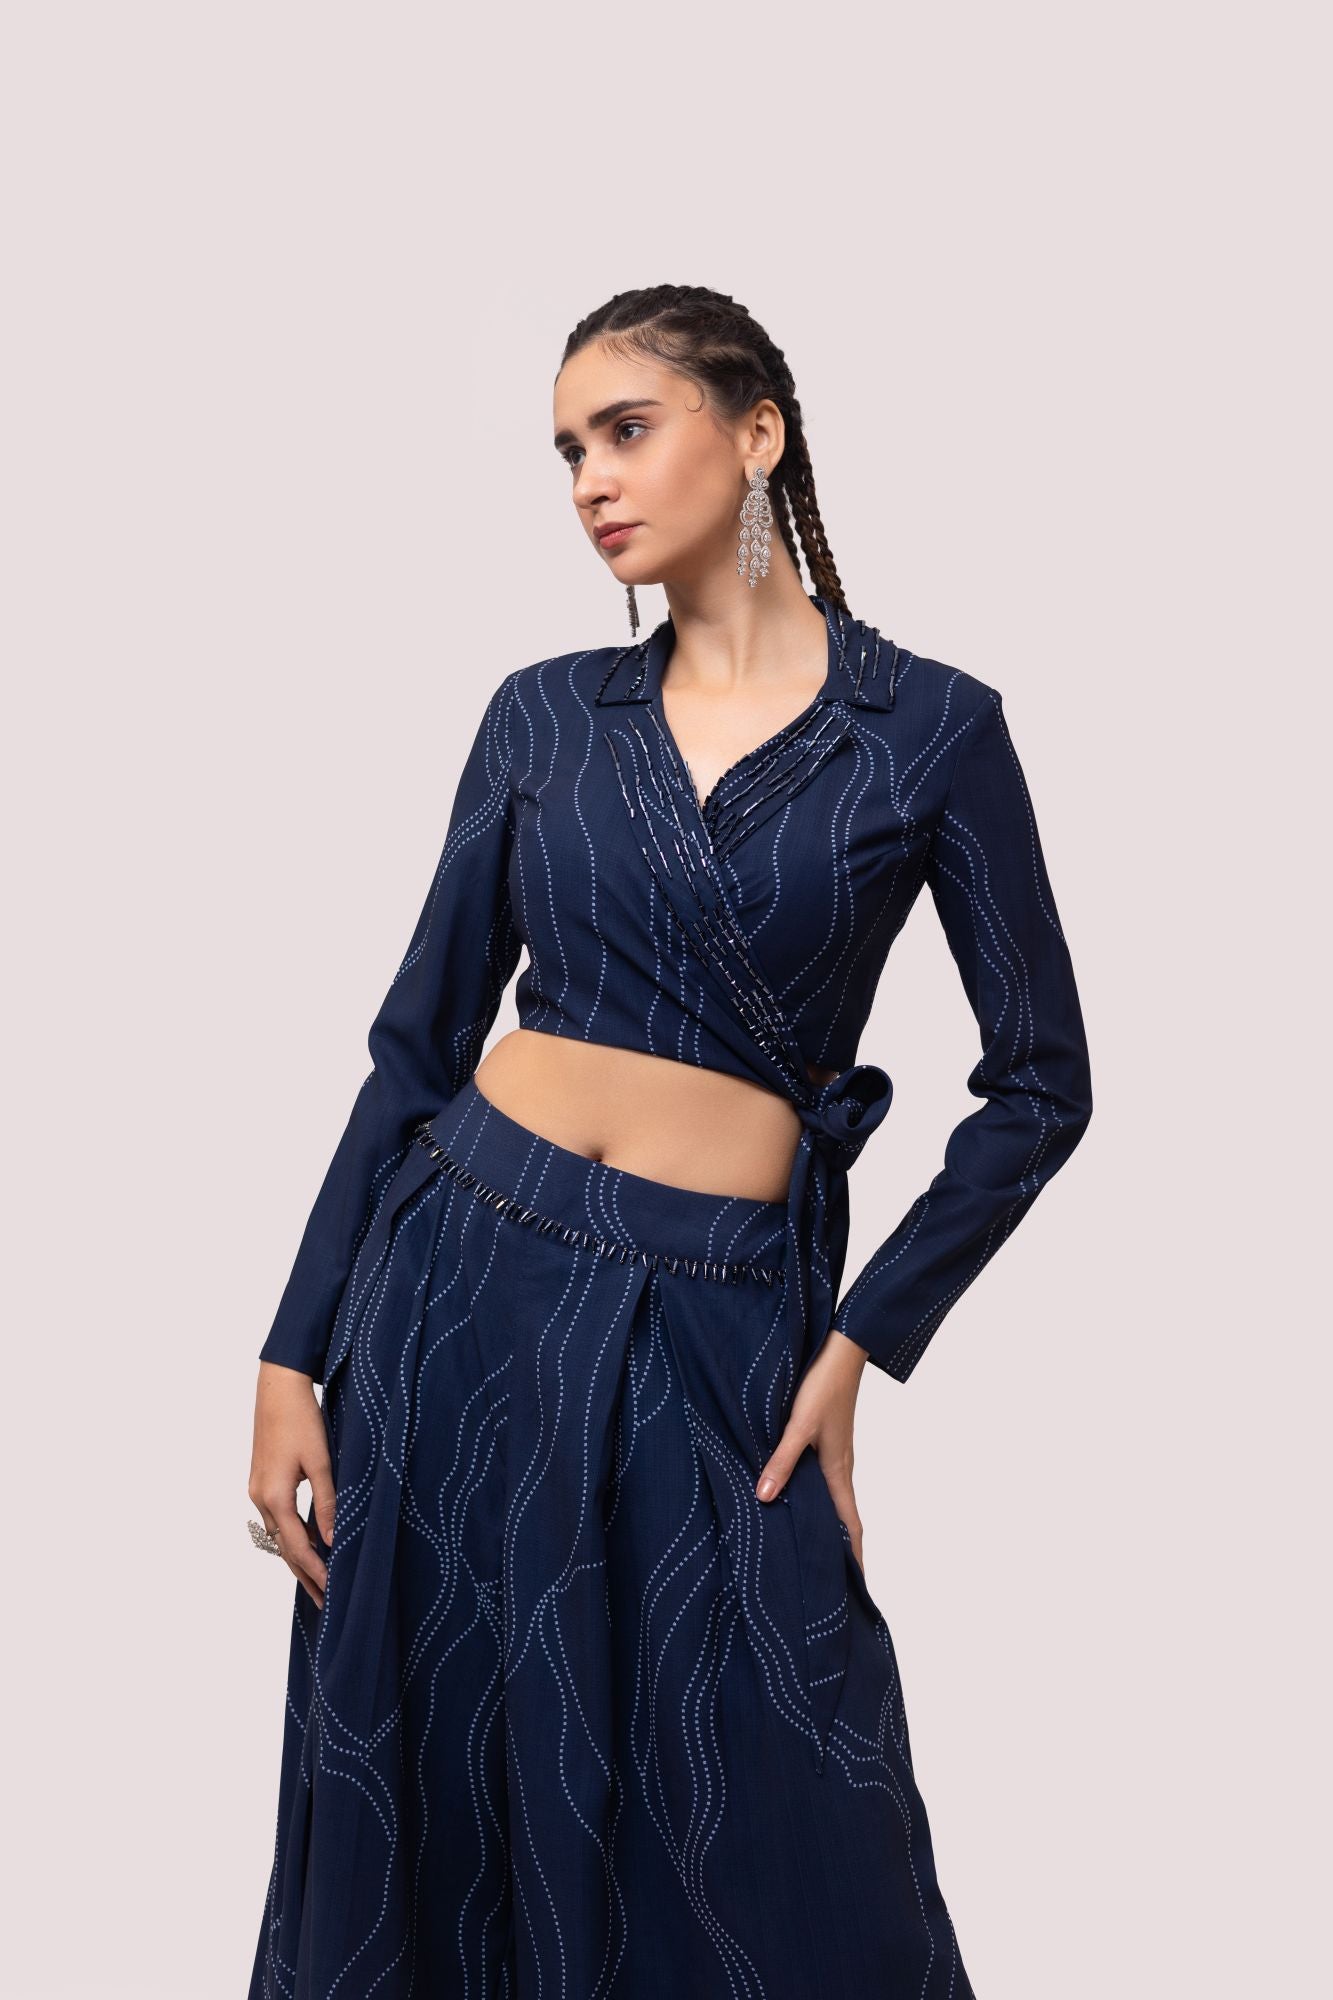 Buy navy blue embellished printed Kota print co-ord set online in USA. Shop the best and latest designs in embroidered sarees, designer sarees, Anarkali suit, lehengas, sharara suits for weddings and special occasions from Pure Elegance Indian fashion store in USA.-closeup